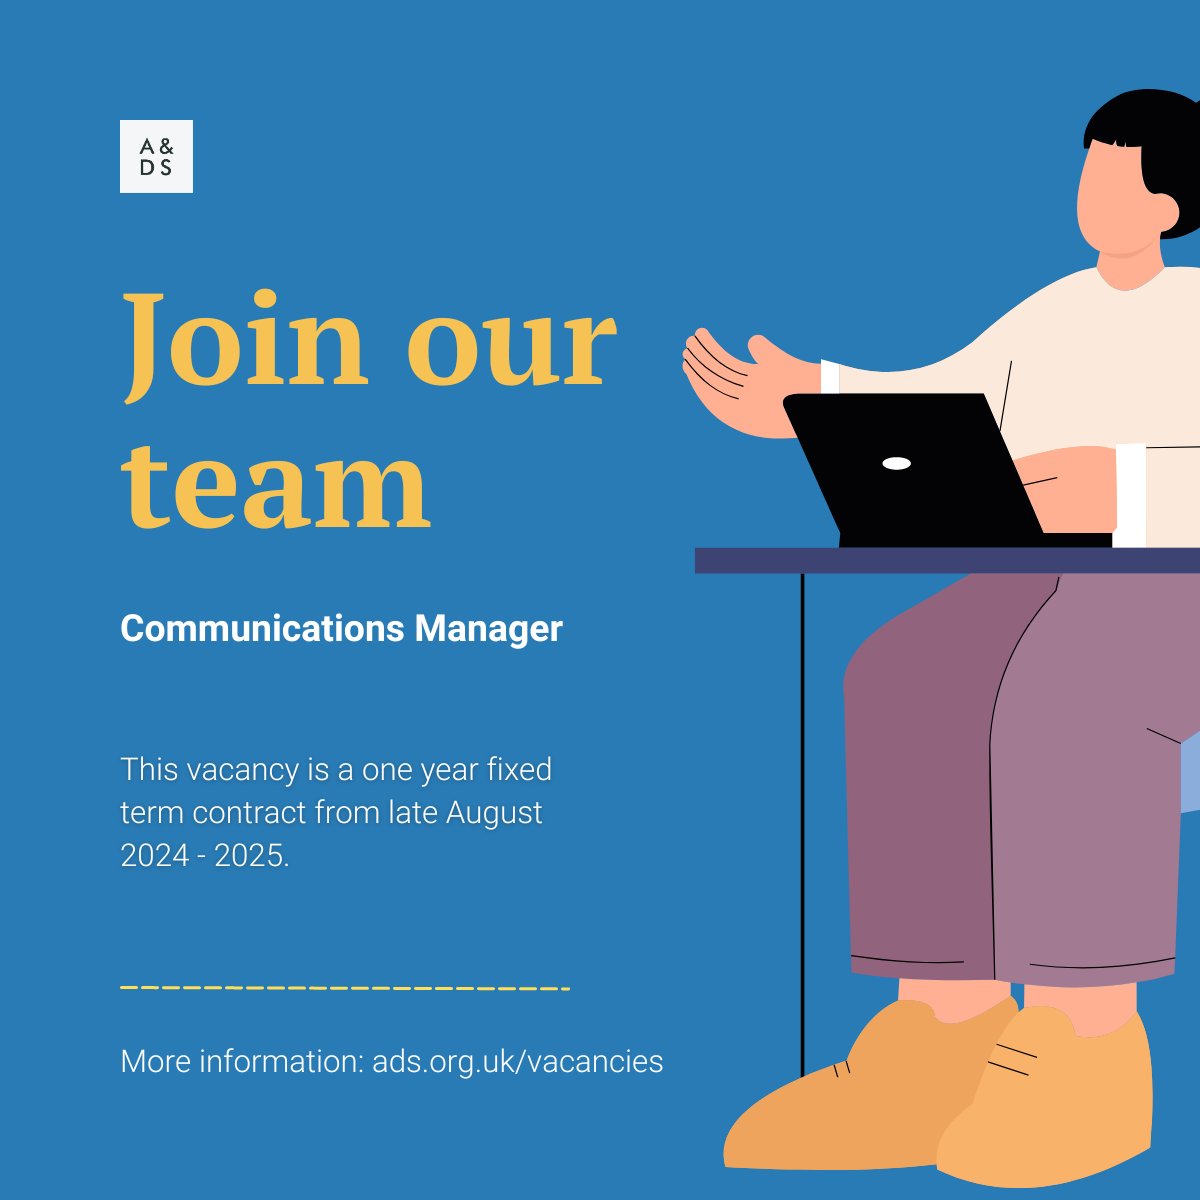 We are now looking for an experienced Communications Manager to join our team for a one year fixed term contract to start in late August 2024 to 2025, to cover a career break. Application deadline 13 June. Apply now 👉 ow.ly/Lut750RH7ev